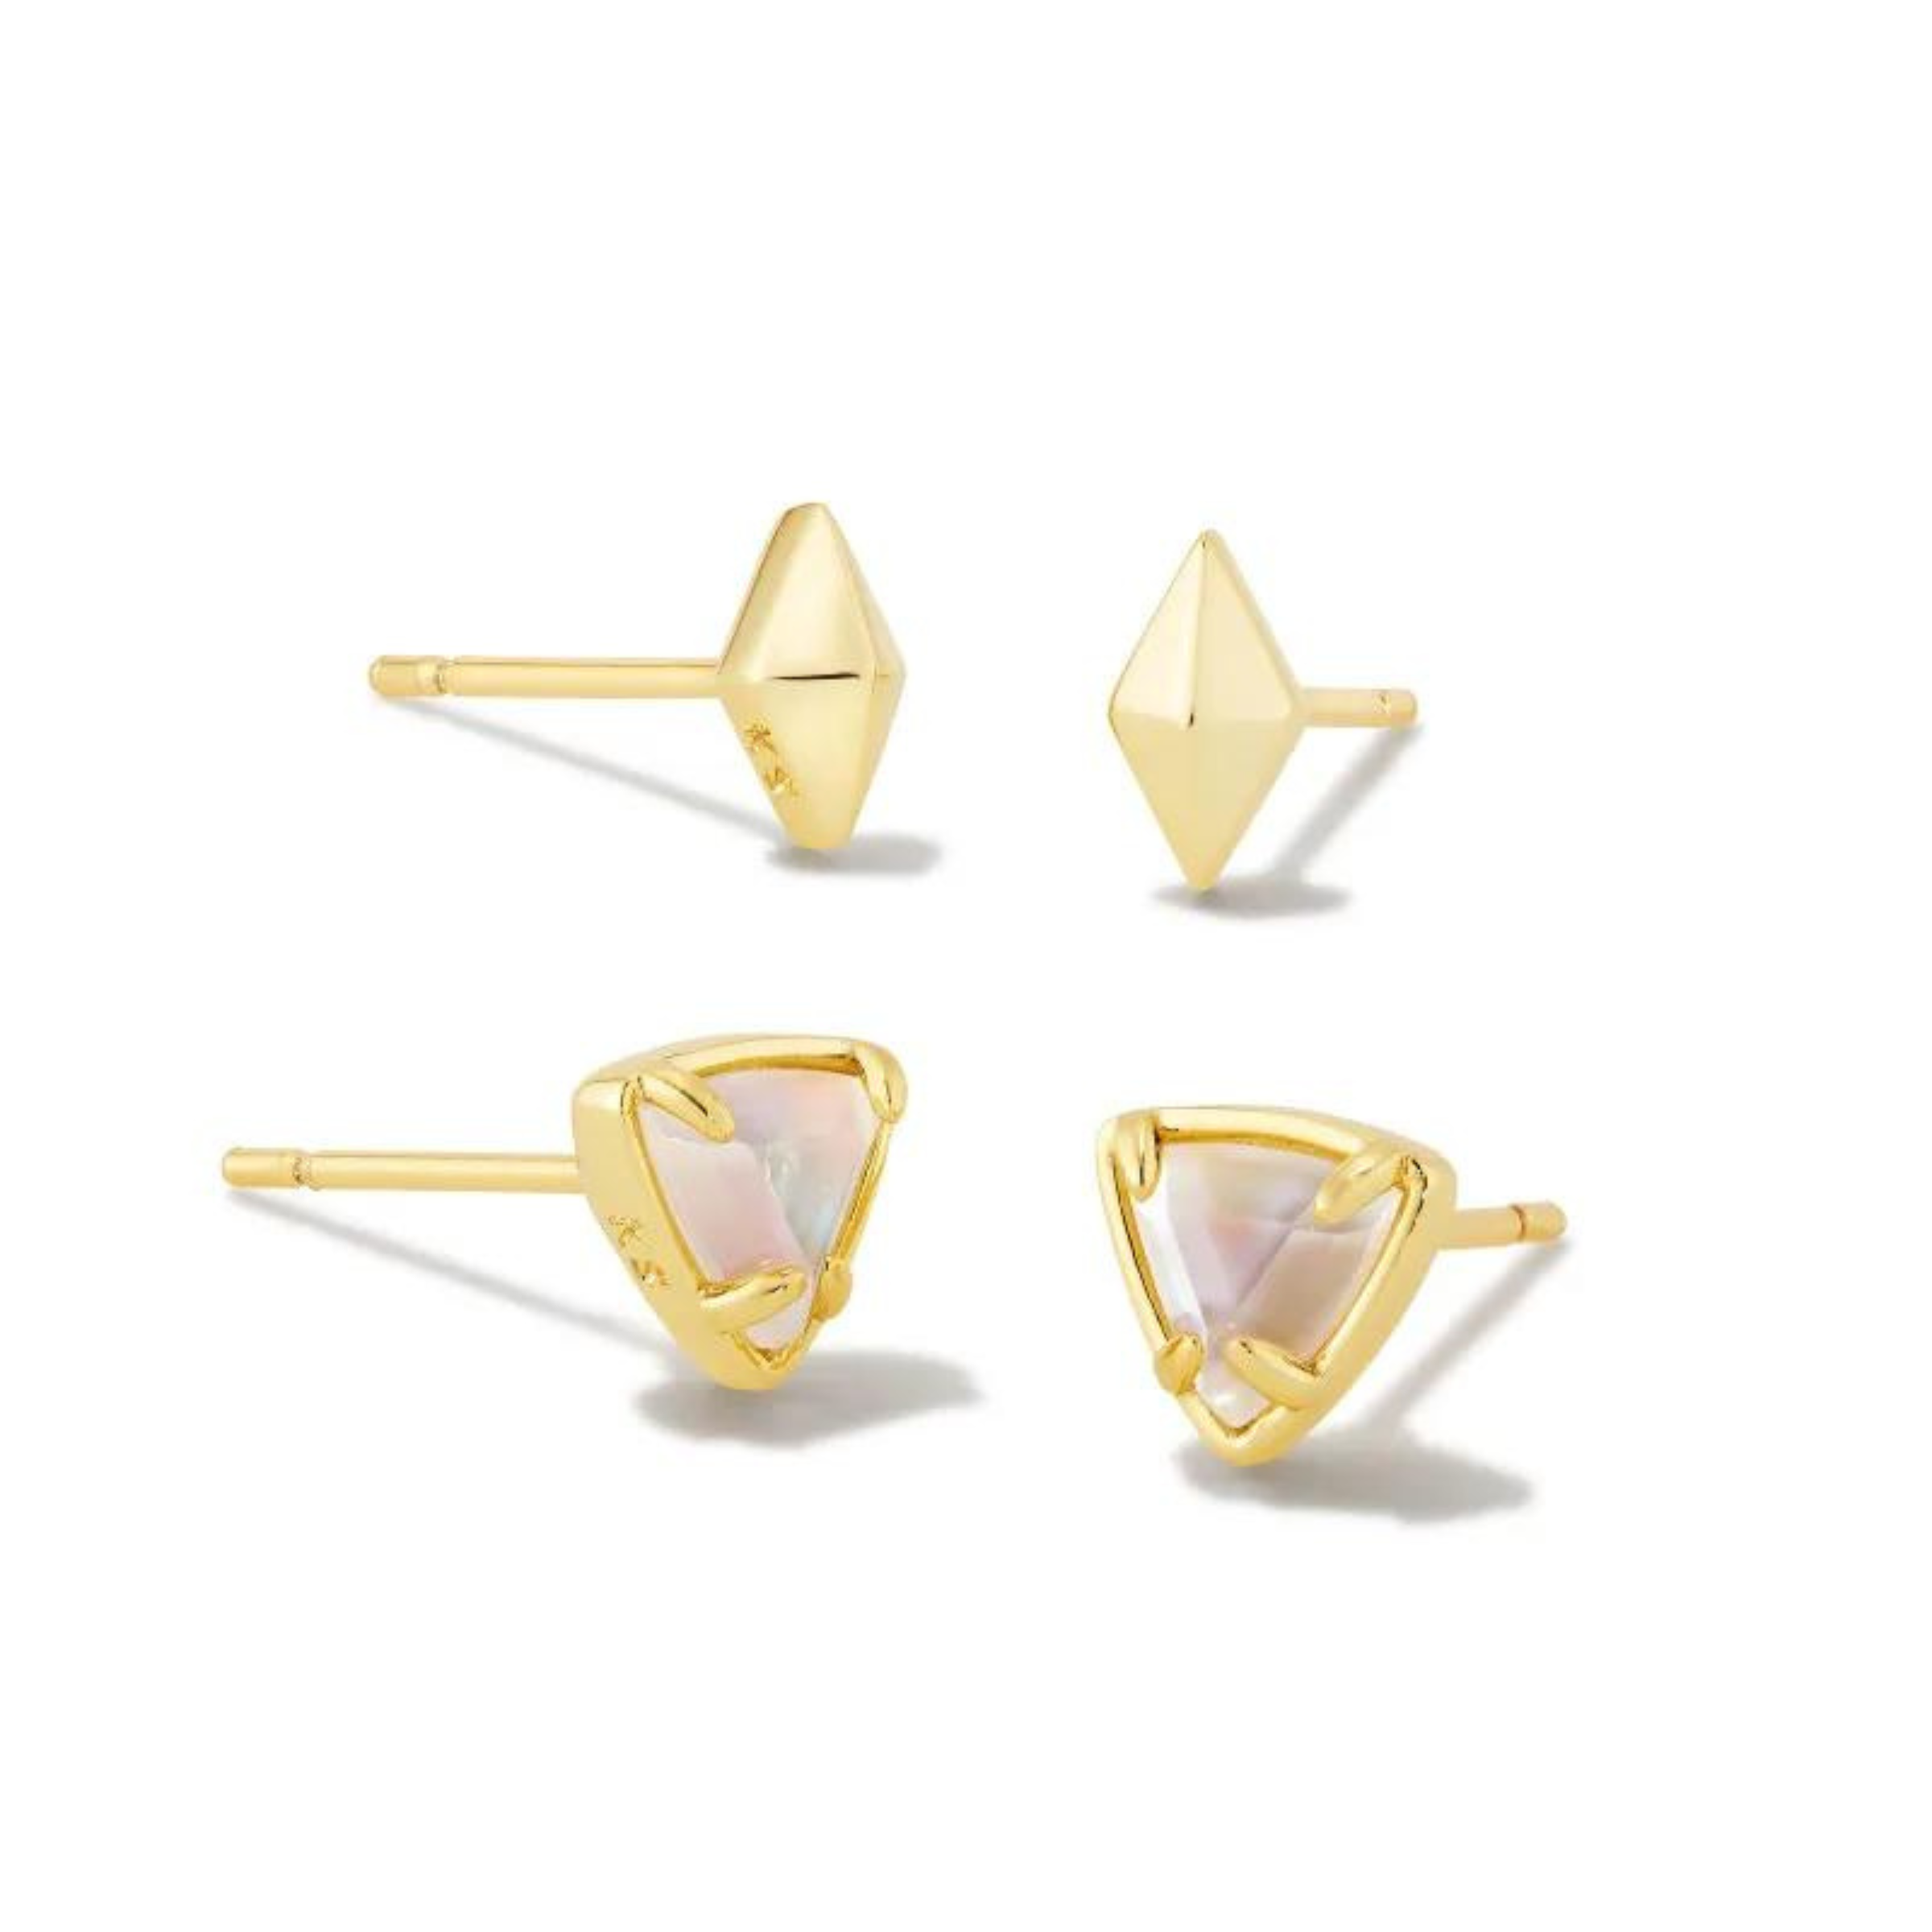 Pictured on a white background are a set of two stud earrings with gold ear posts. The top pair has a gold, diamond shaped stud. The bottom pair are gold triangle studs with ivory crystal centers. 